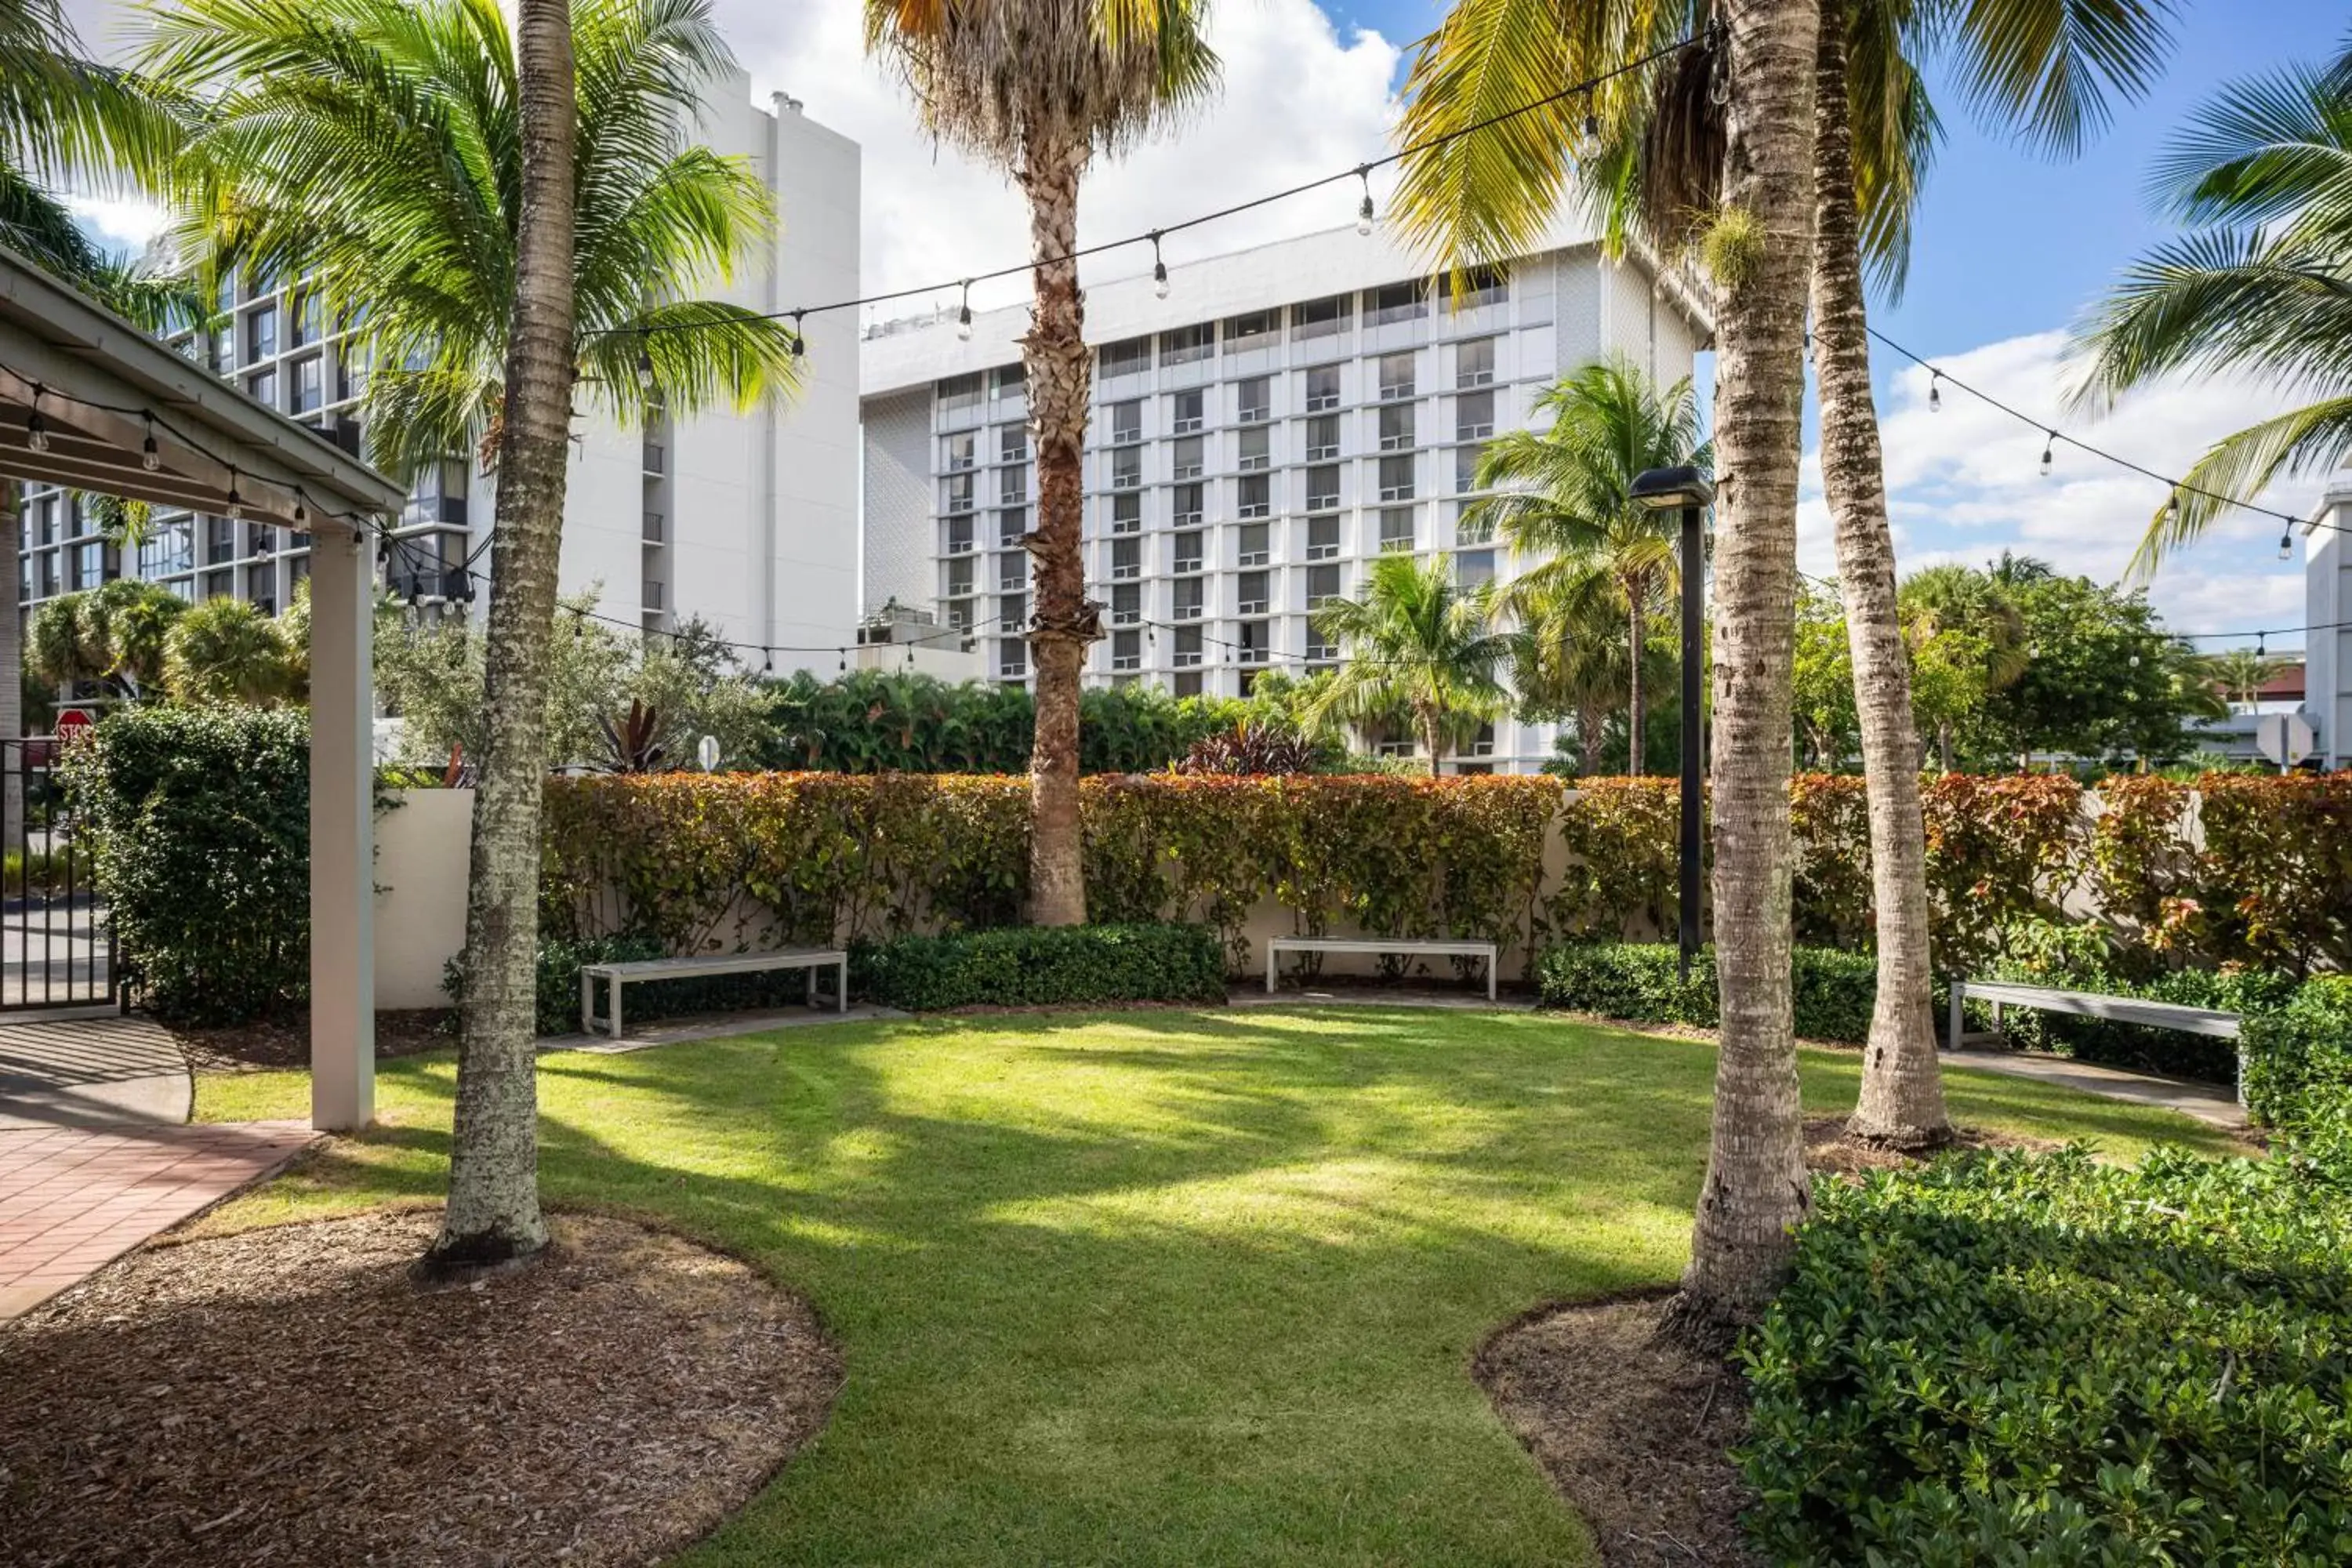 Property building, Garden in Residence Inn by Marriott Miami Airport